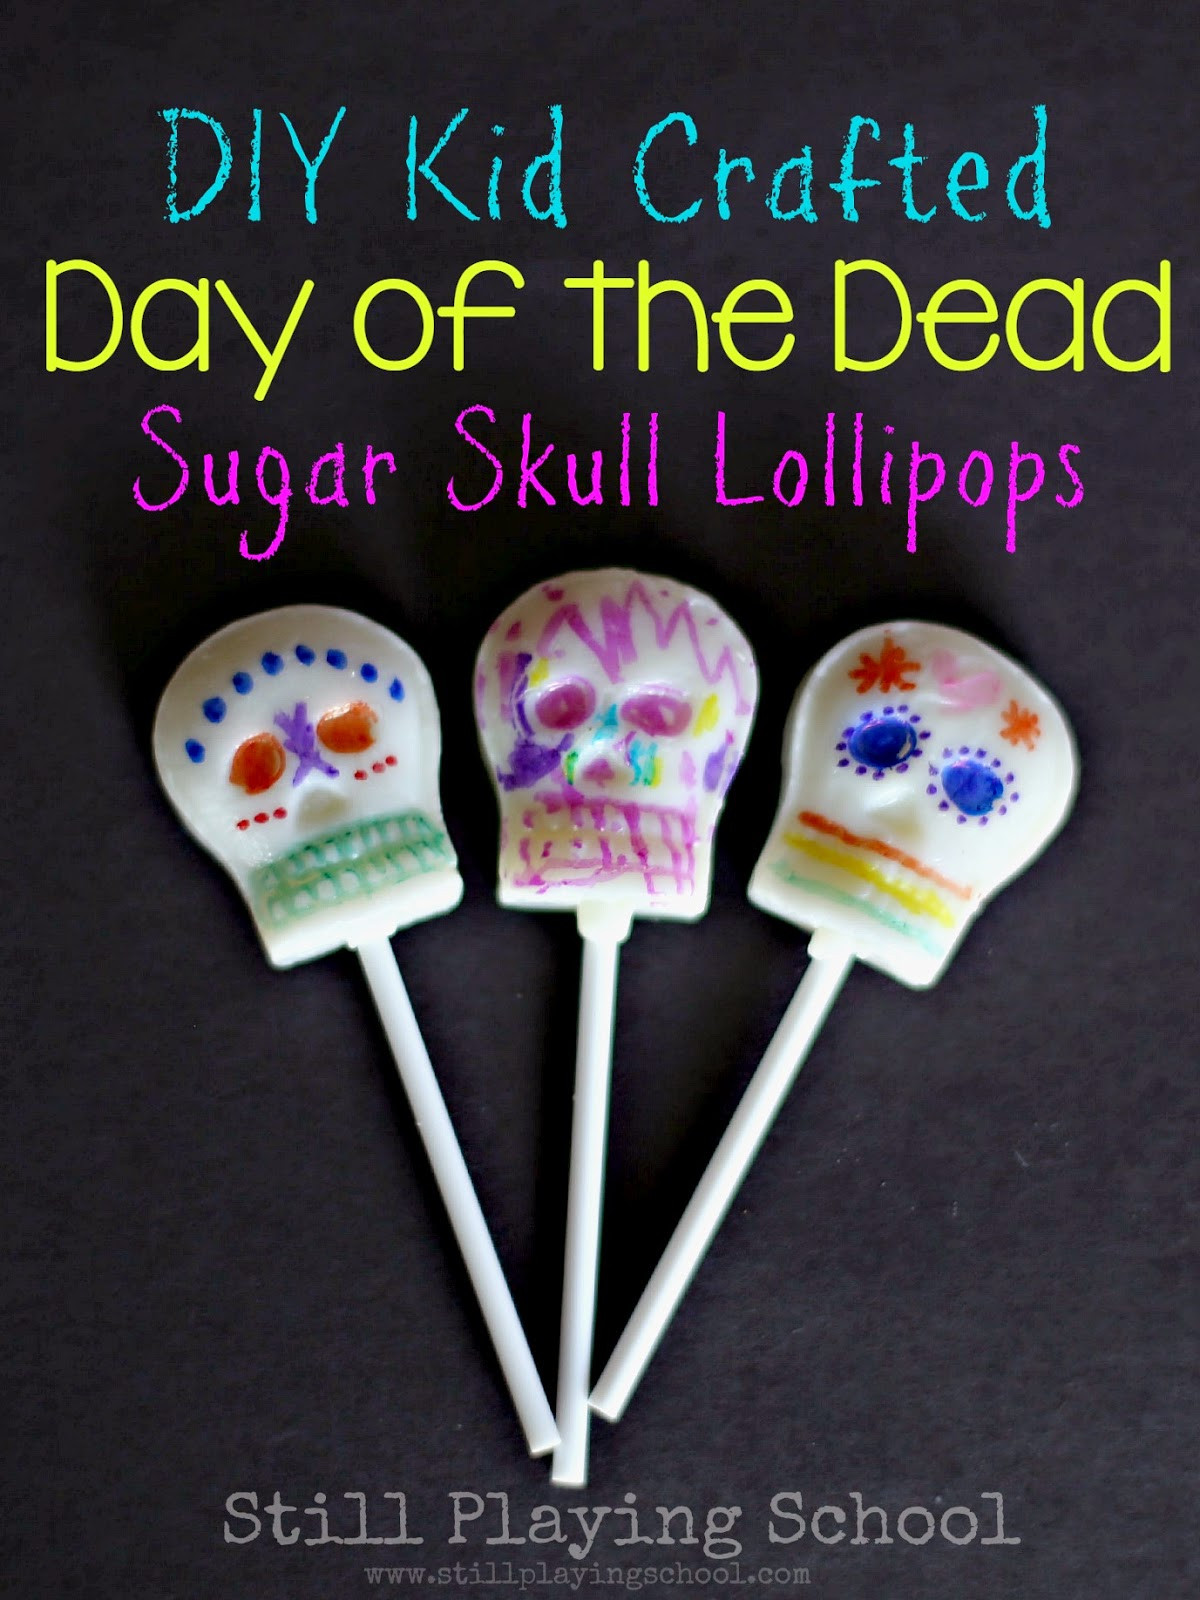 Day Of The Dead Crafts For Kids
 Day of the Dead Sugar Skull Craft for Kids